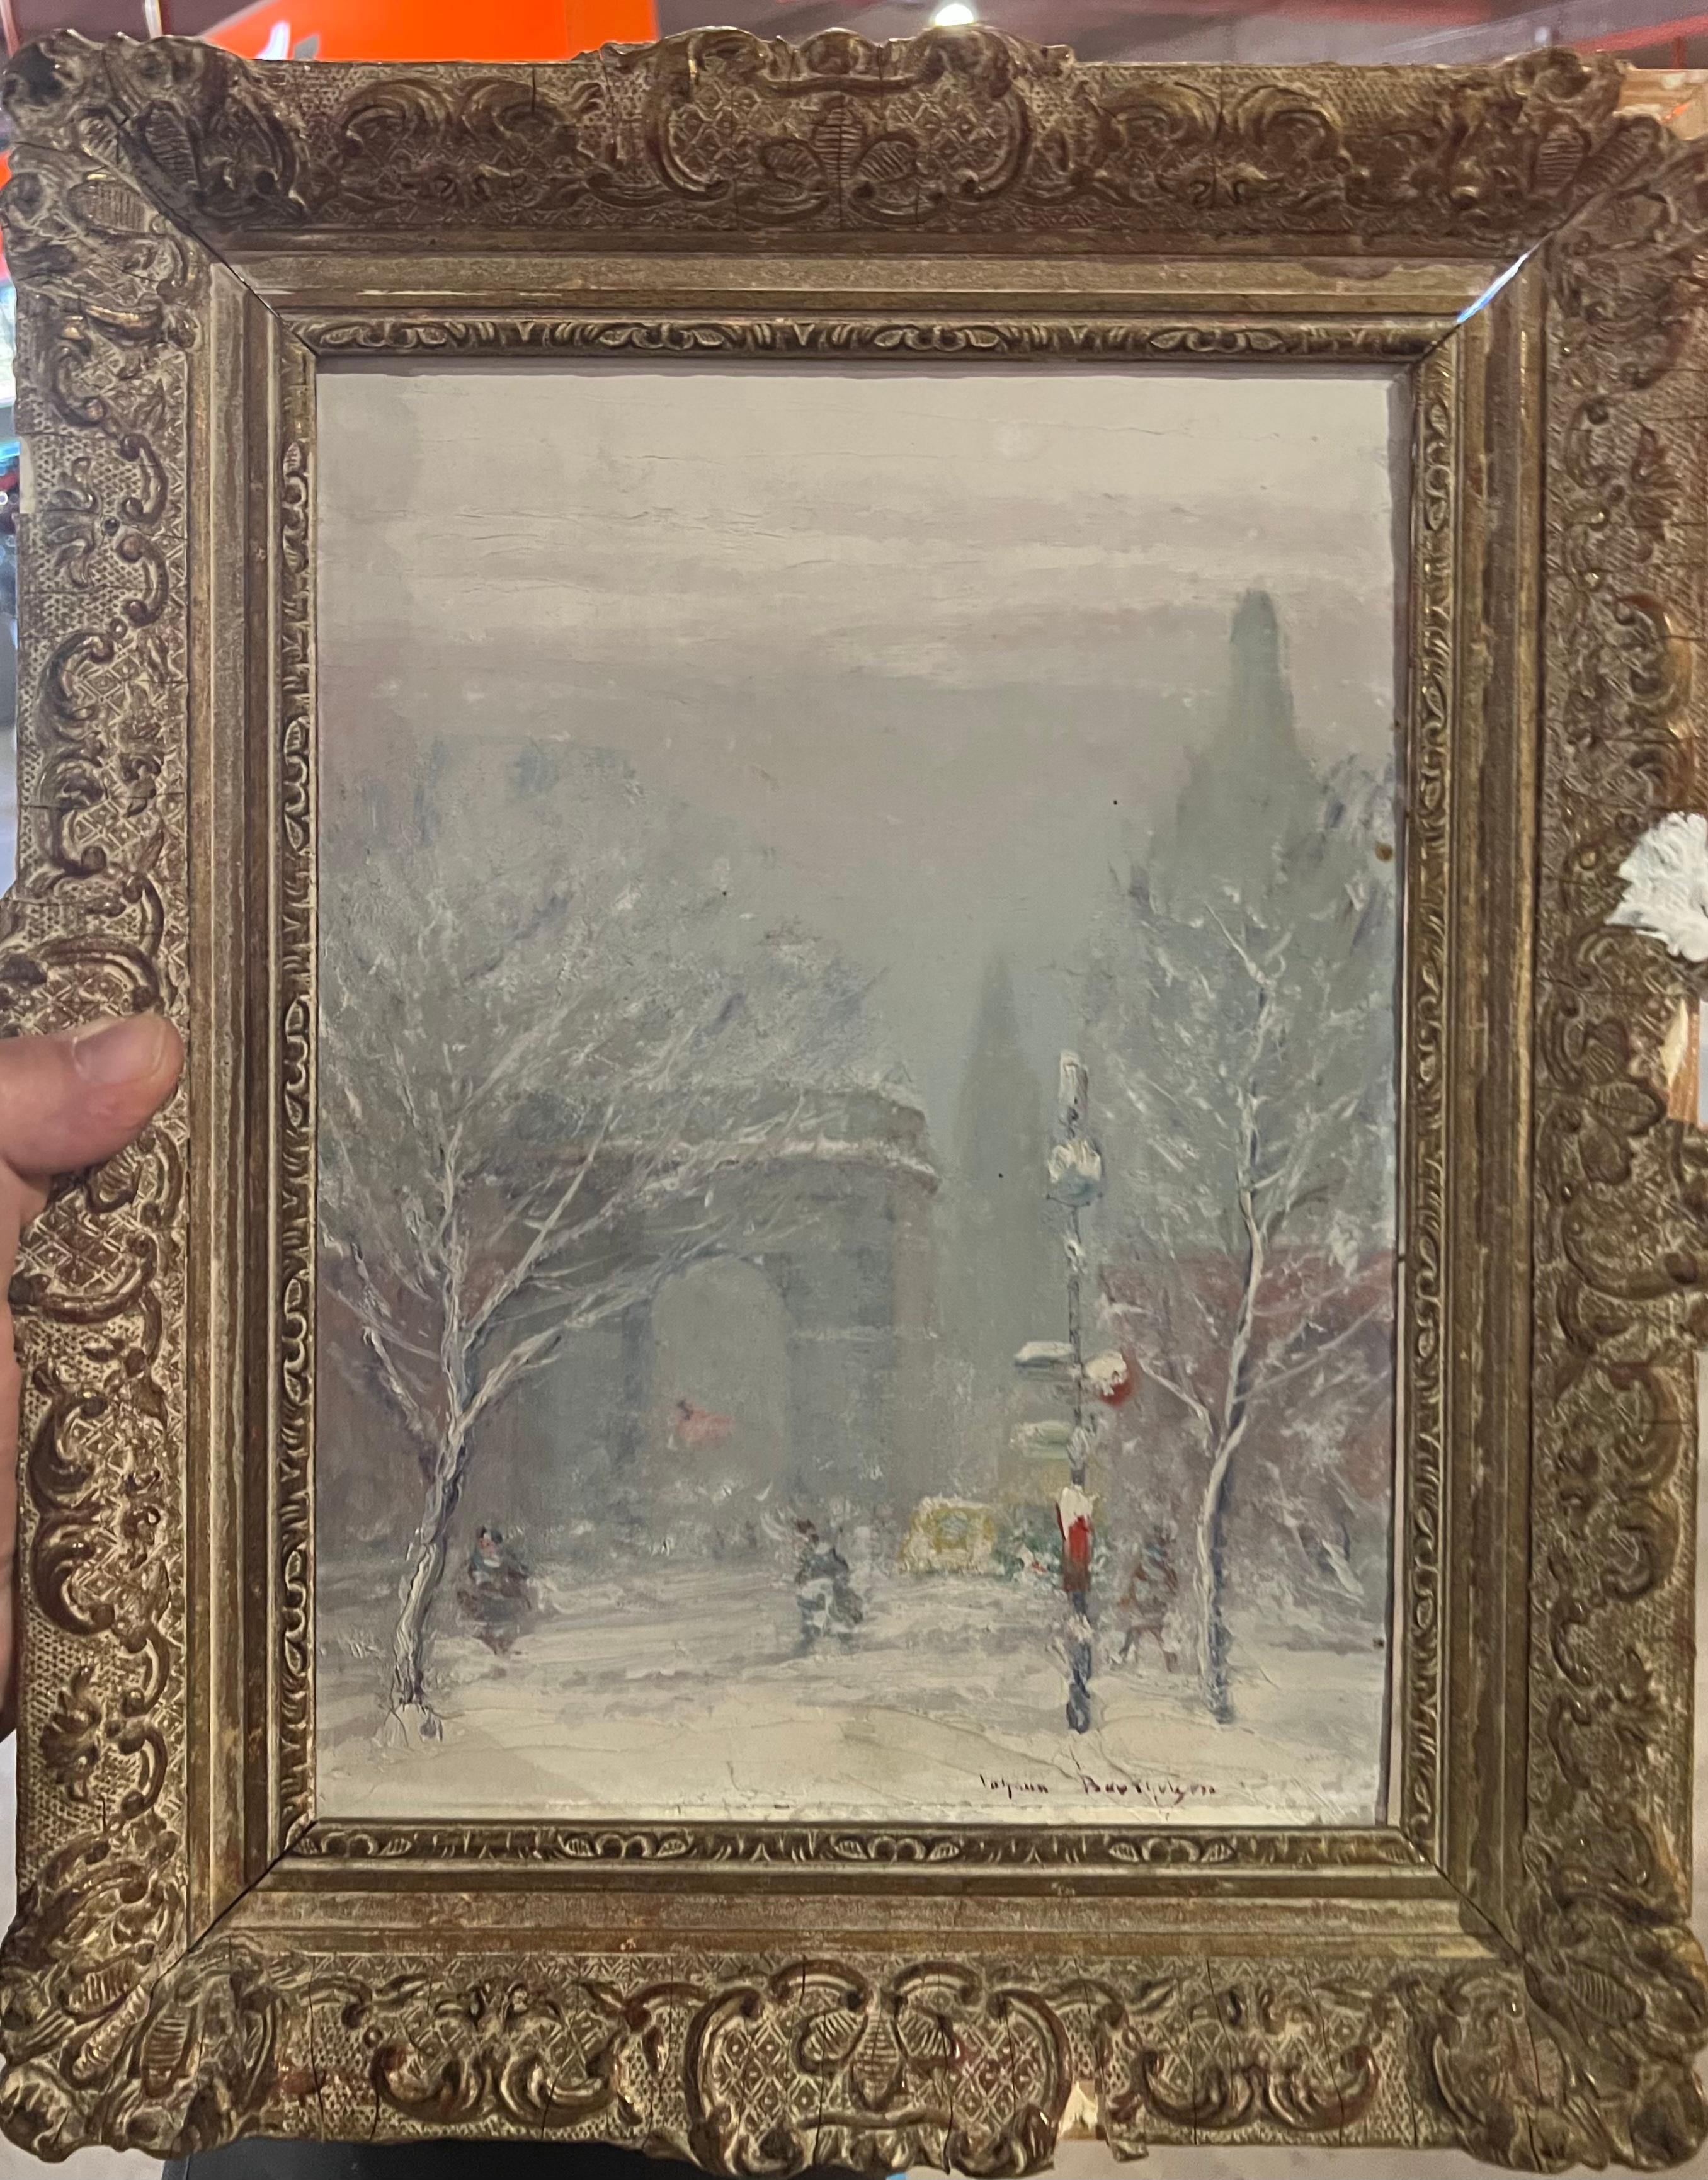 American Impressionist “WASHINGTON SQUARE PARK” with Figures and Cars - Painting by Johann Berthelsen